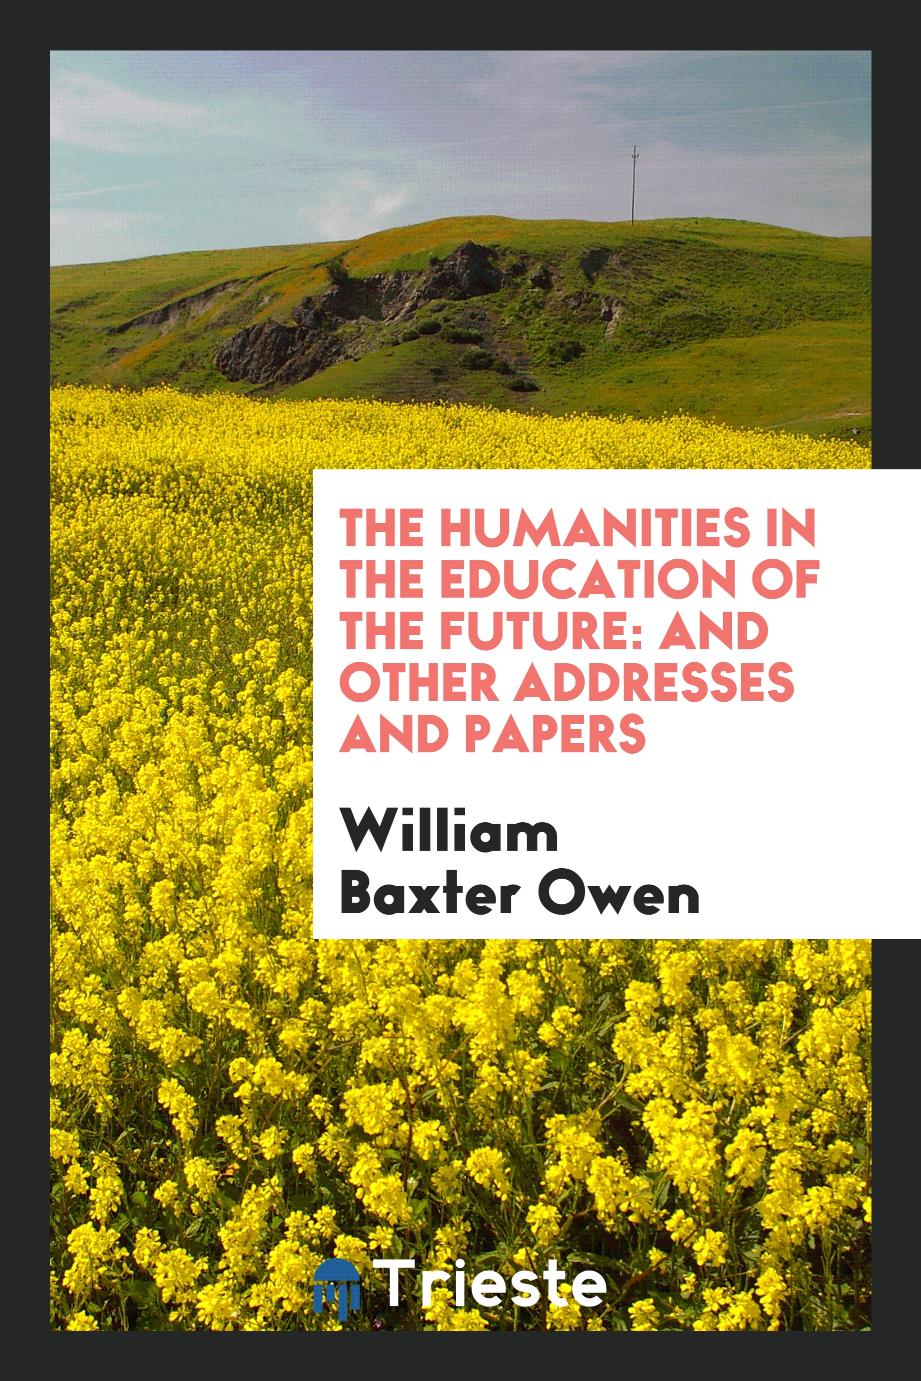 The Humanities in the Education of the Future: And Other Addresses and Papers